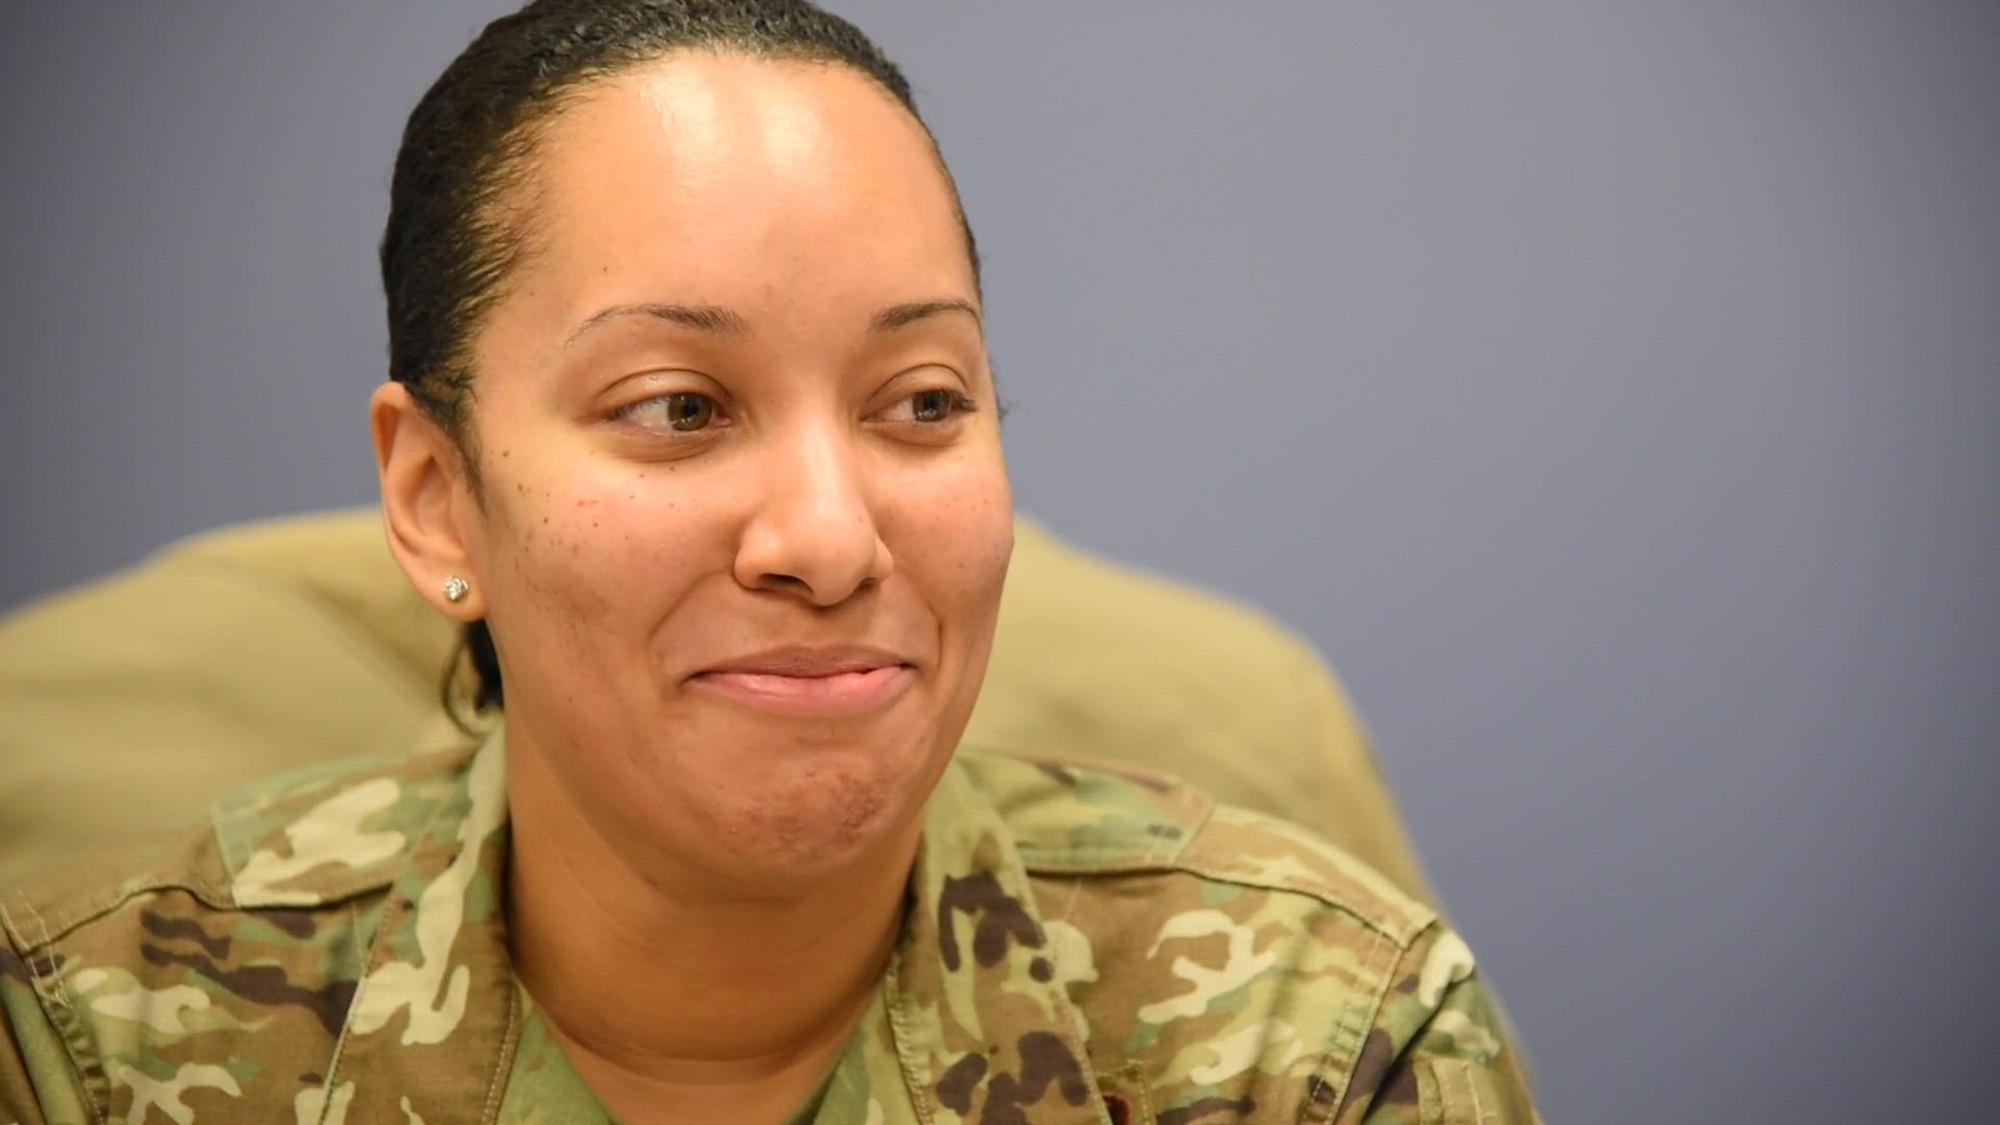 In honor of Women's History Month and International Women's Day, Maj Dominoe Strong and the 108th Wing celebrate the value of women in leadership.